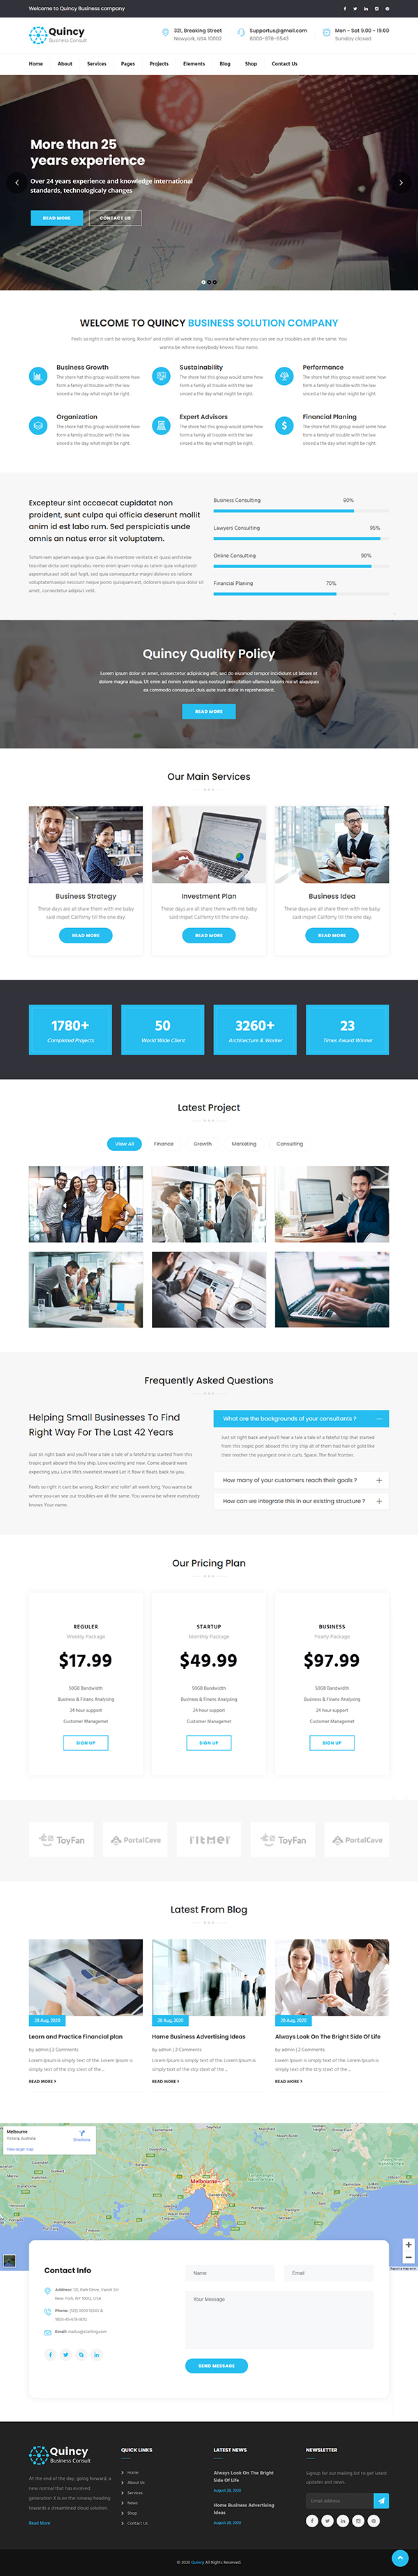 Quincy – Business Consulting WordPress Theme